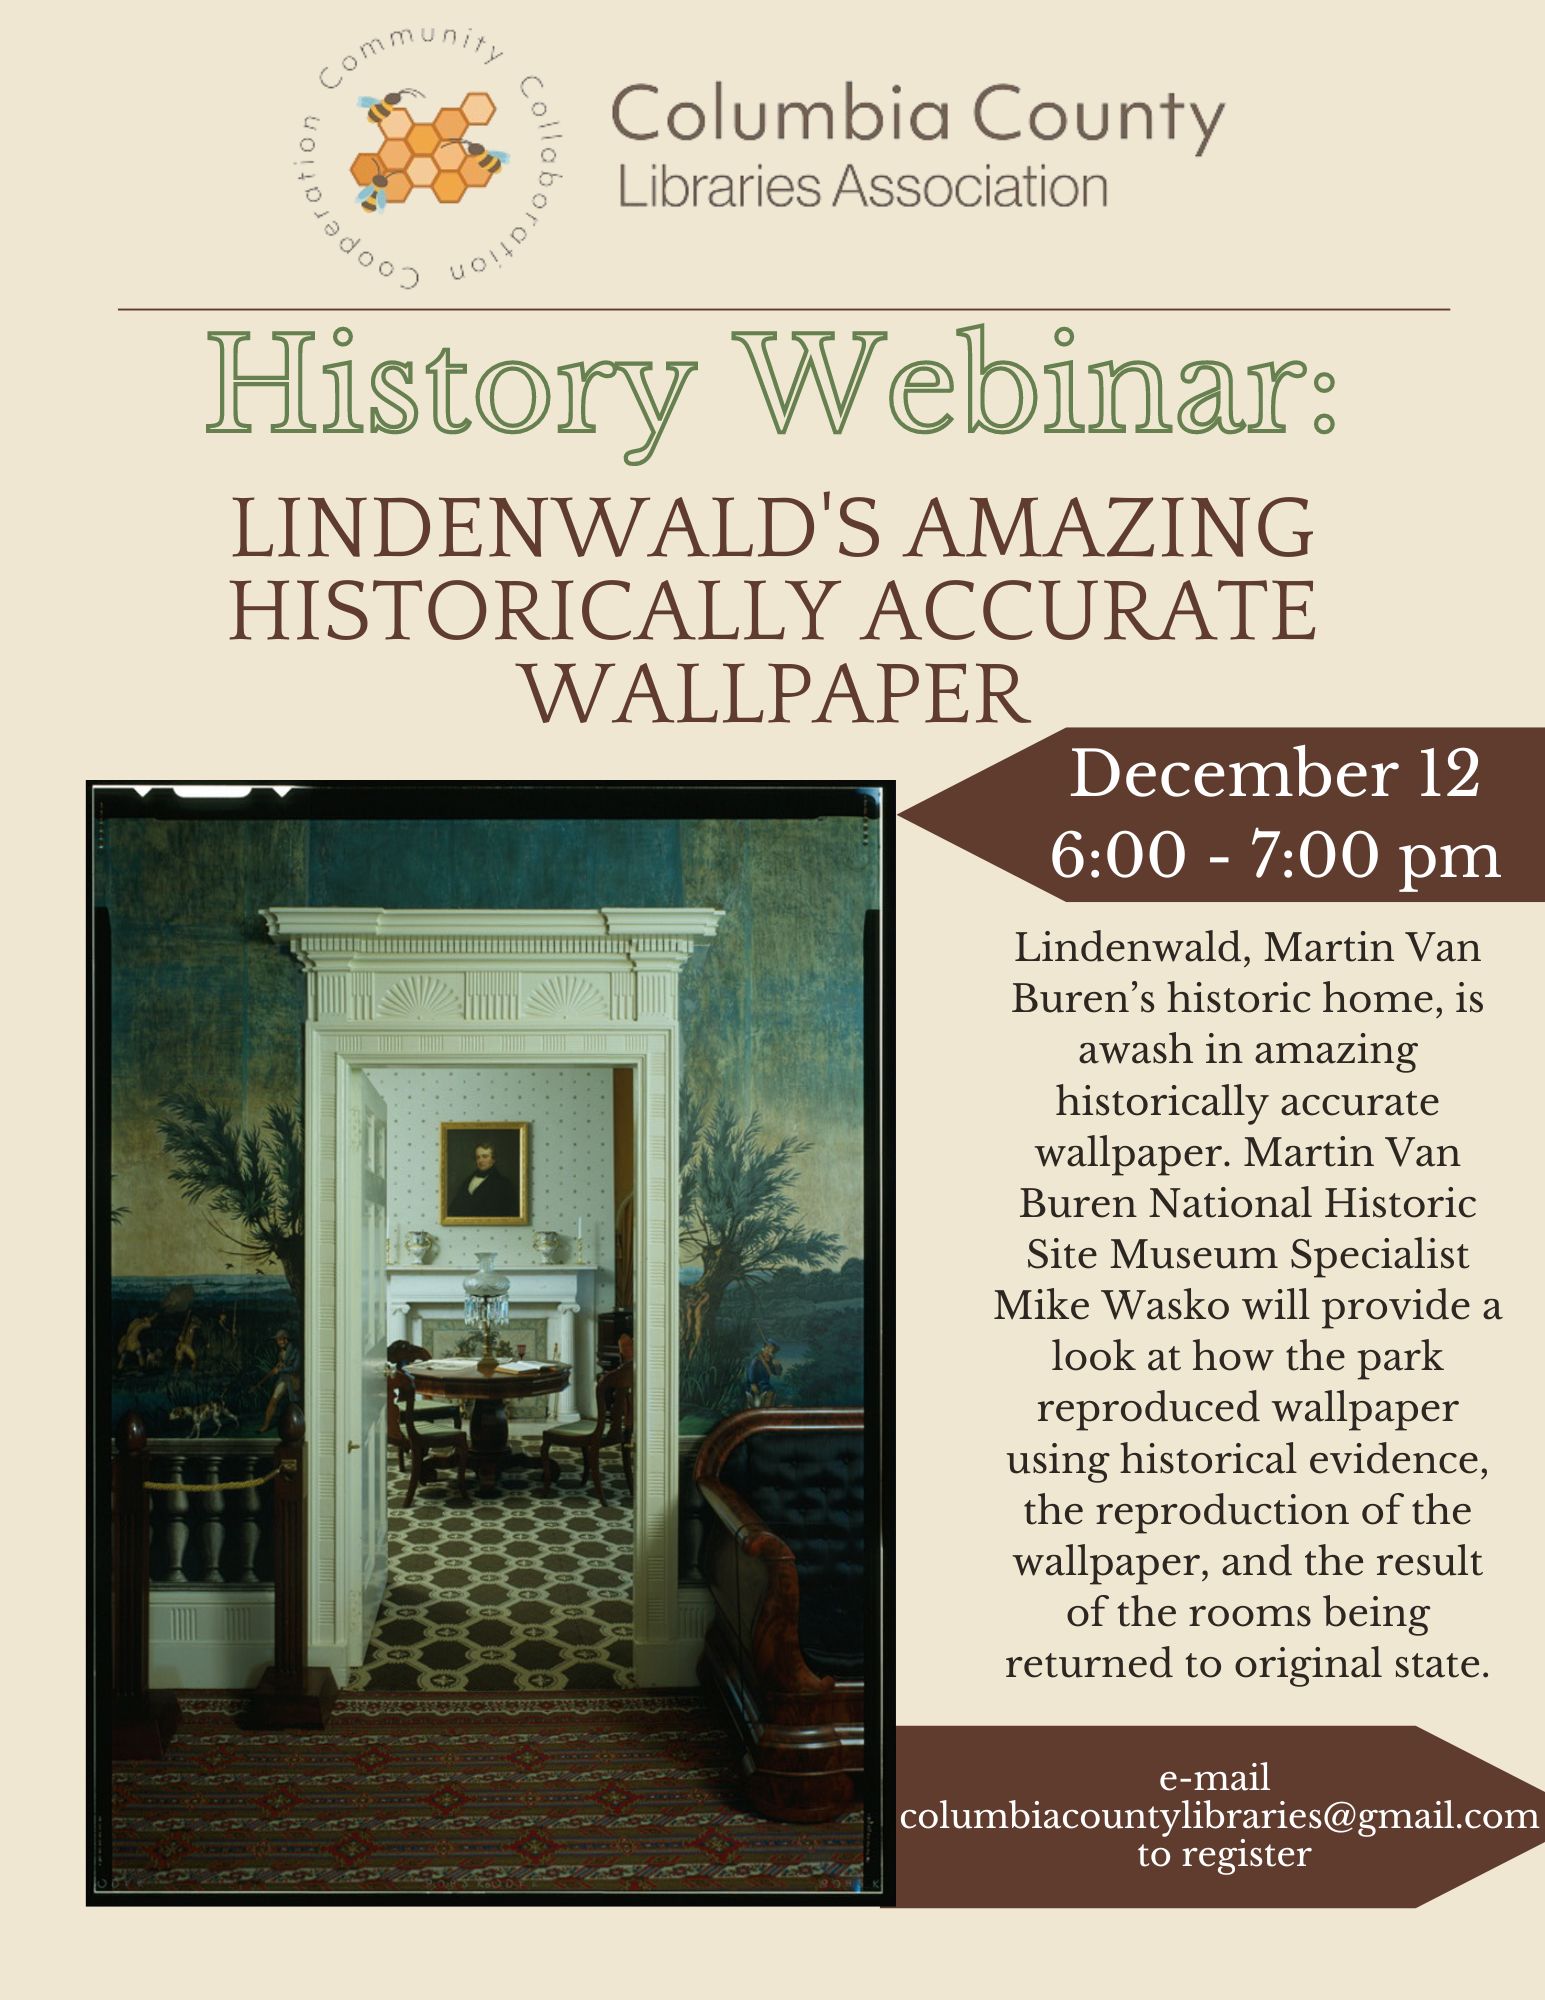 History Webinar: Lindenwald's Amazing Historically Accurate Wallpaper